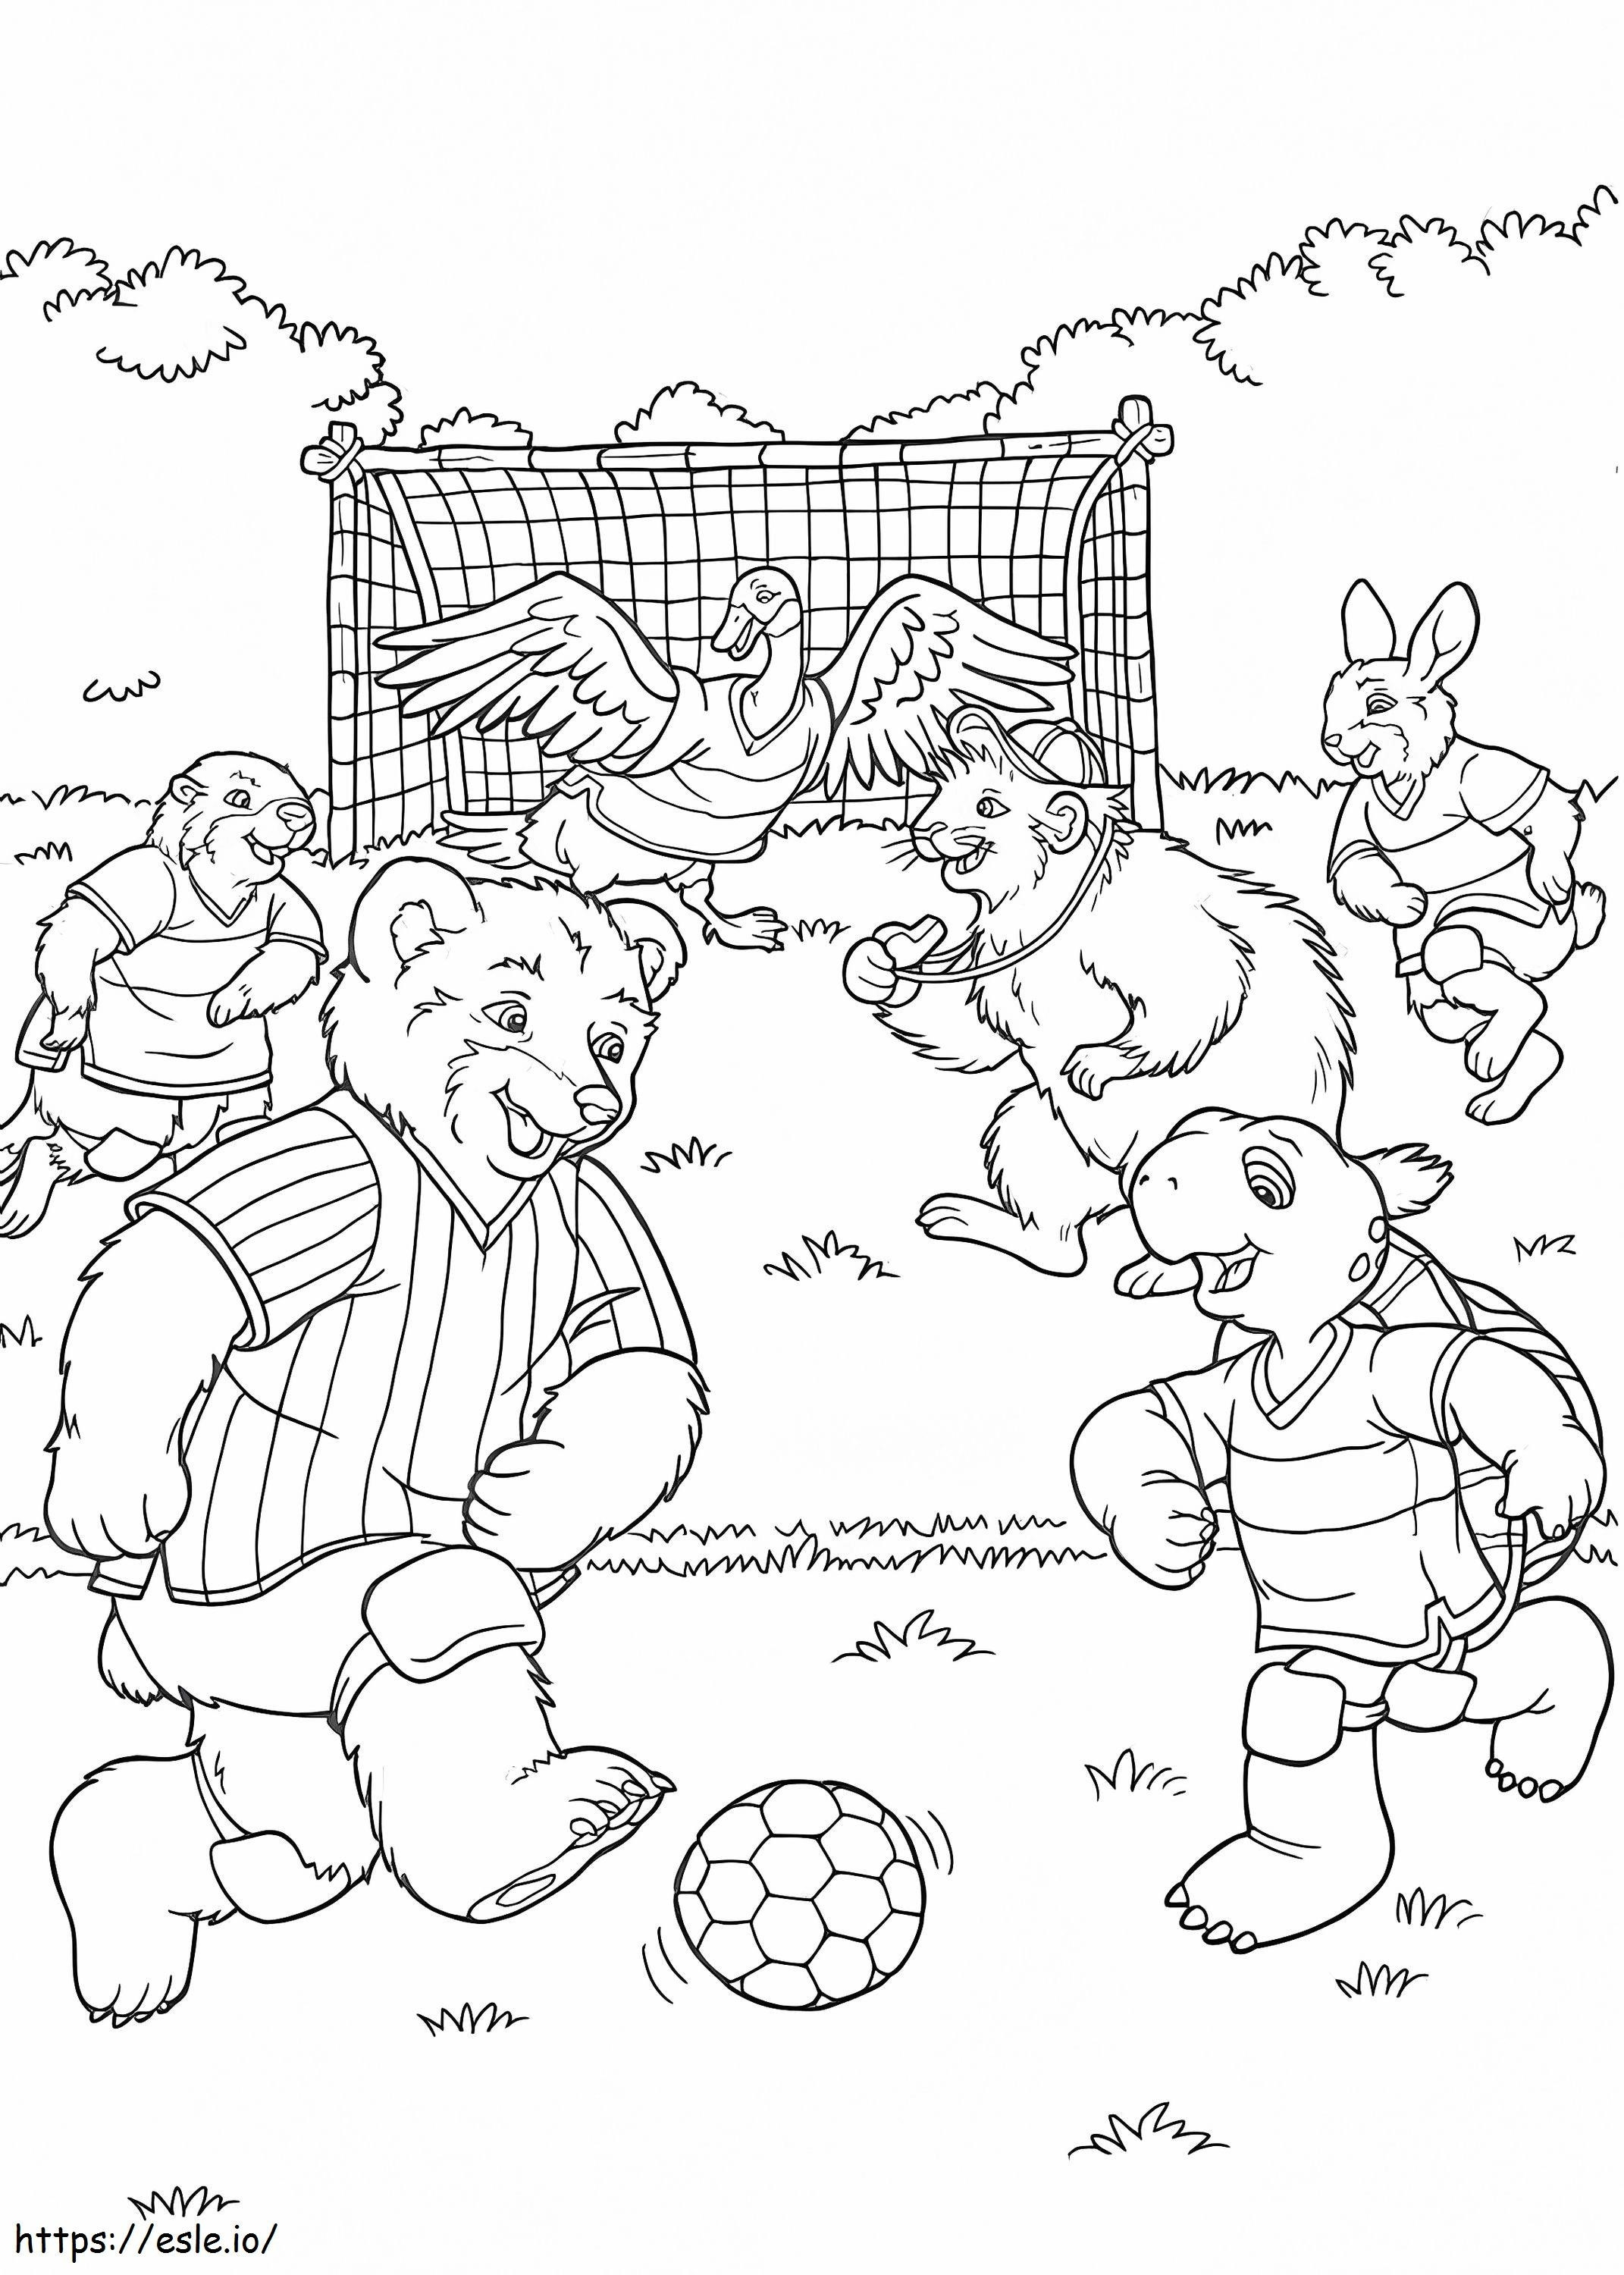 Franklin Characters Playing Soccer A4 coloring page